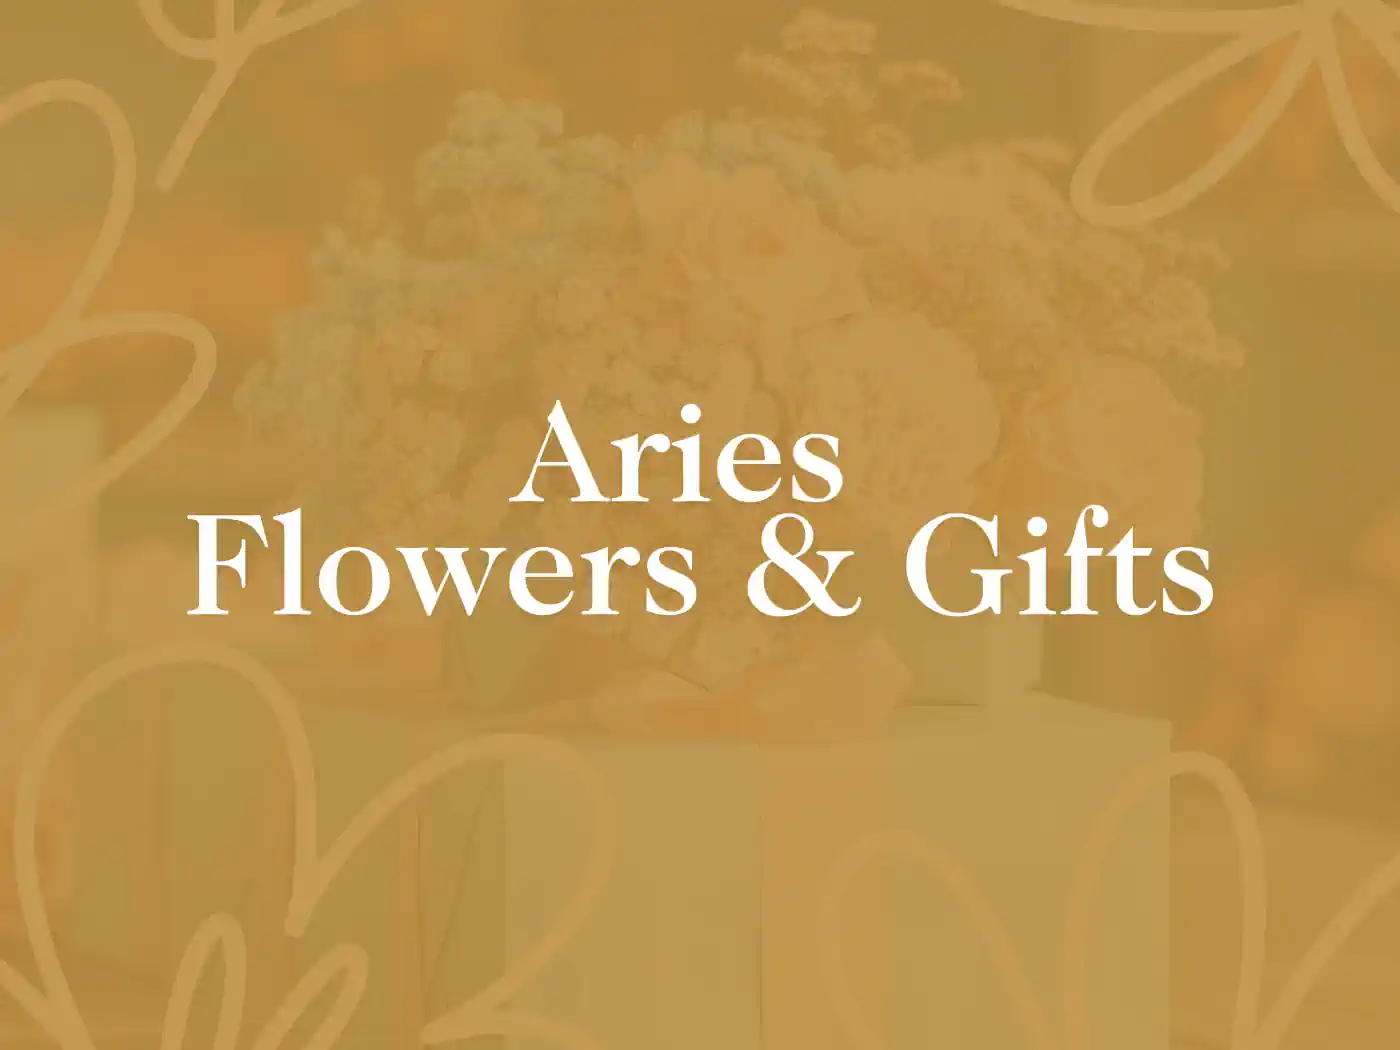 A stylised image with the text "Aries Flowers & Gifts" on a floral background. Aries Flowers & Gifts Collection. Fabulous Flowers and Gifts.